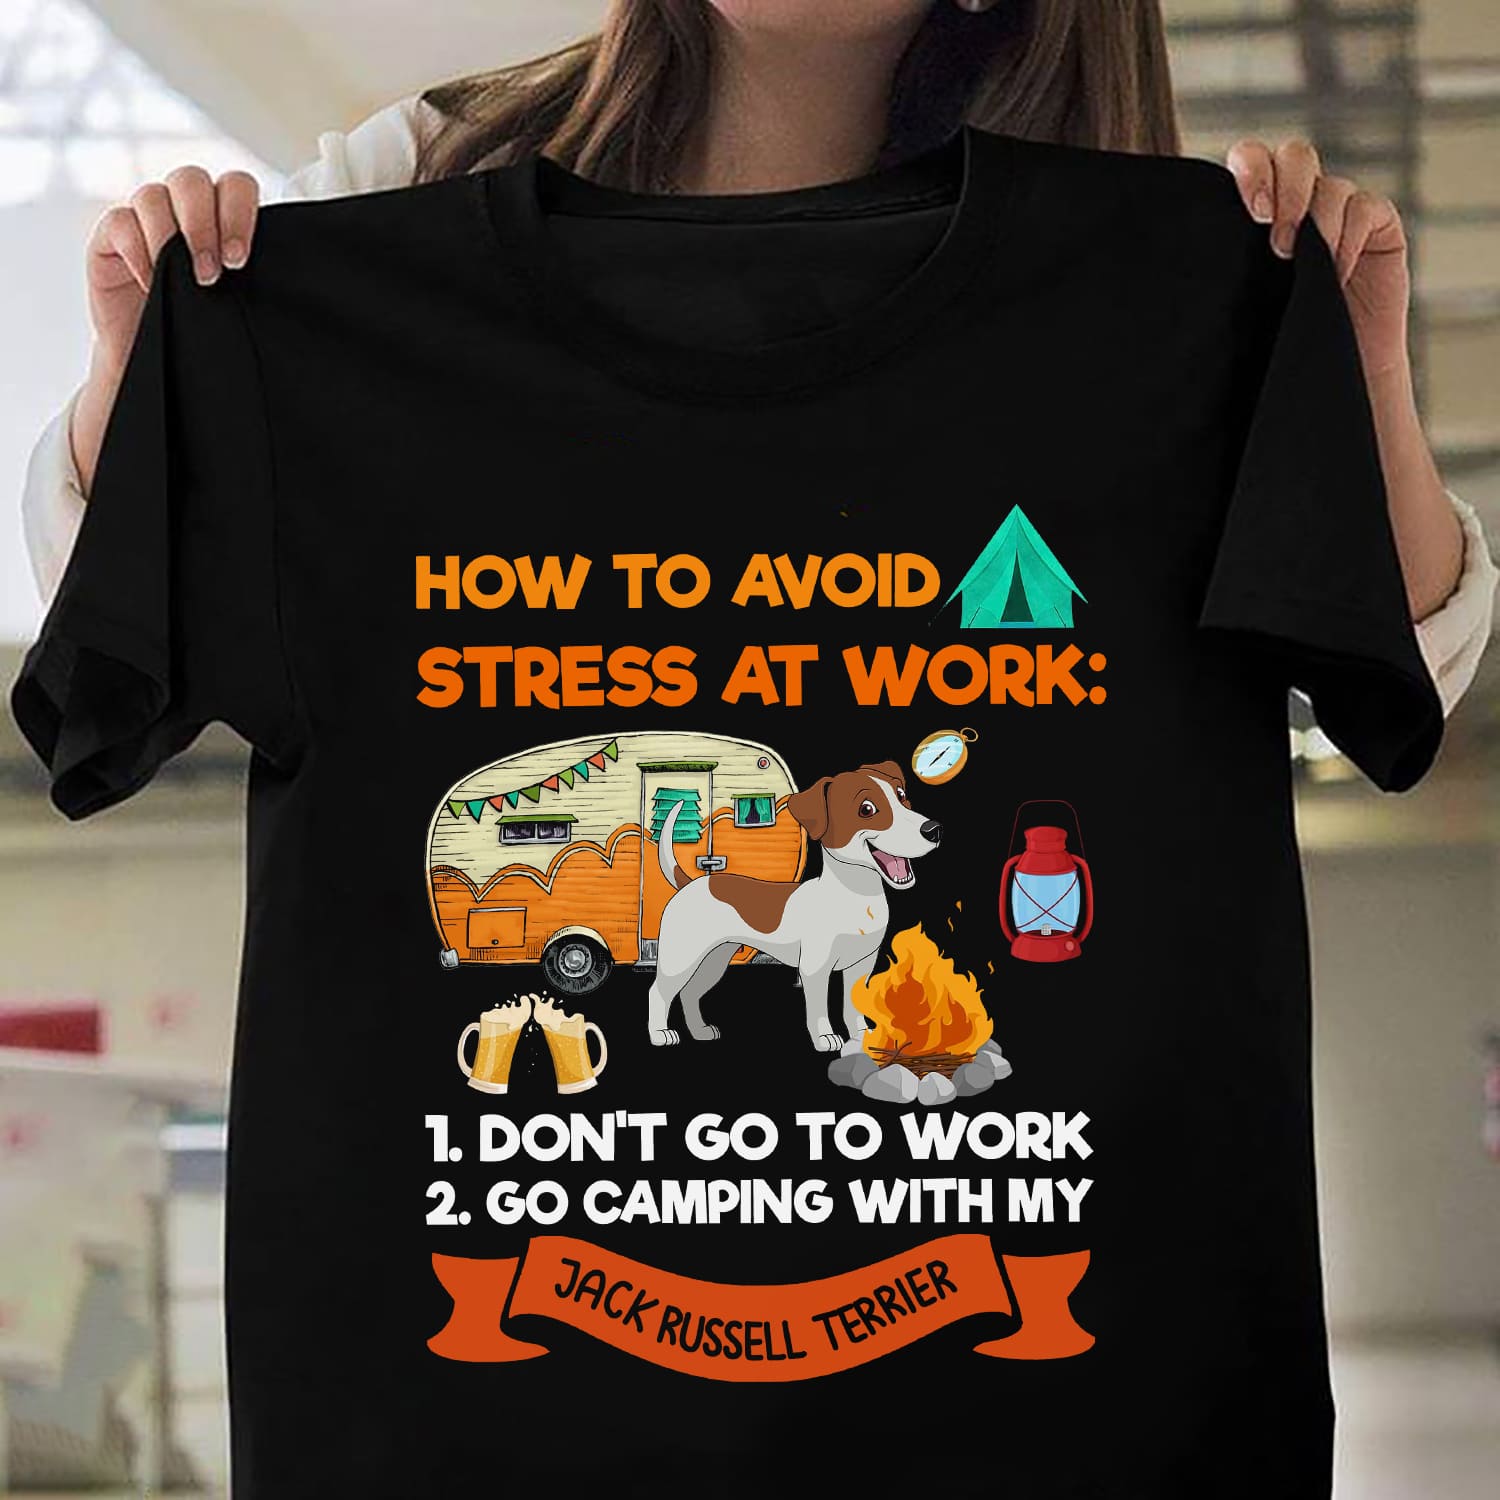 How to avoid stress at work - Don't go to work, Camping with dogs, Jack Russel Terrier dog